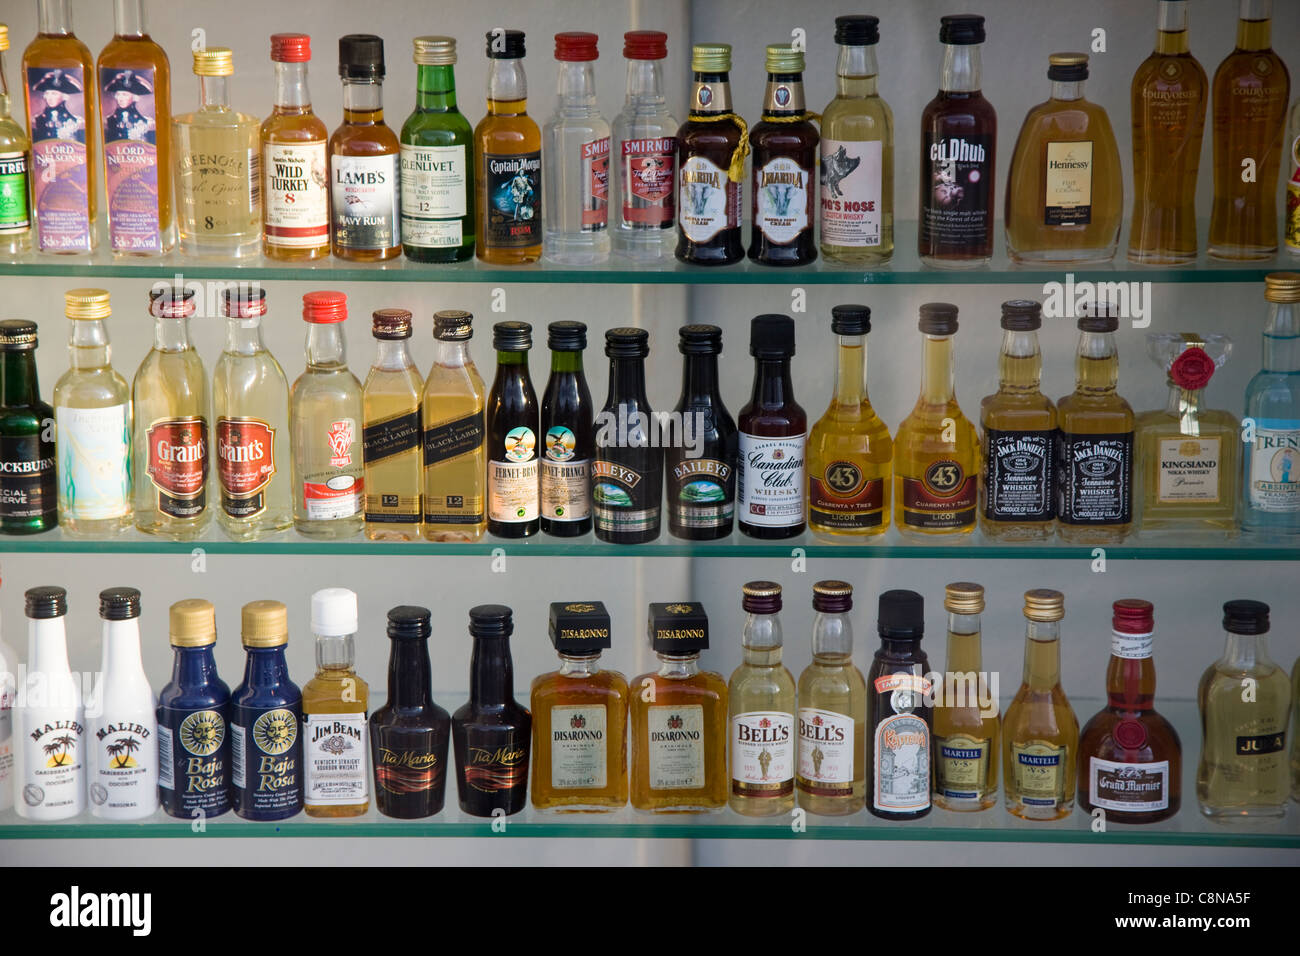 Miniature bottles of whisky, brandy, vodka, cognac, gin, and other types of alcohol in a shop window, Blackpool, UK Stock Photo